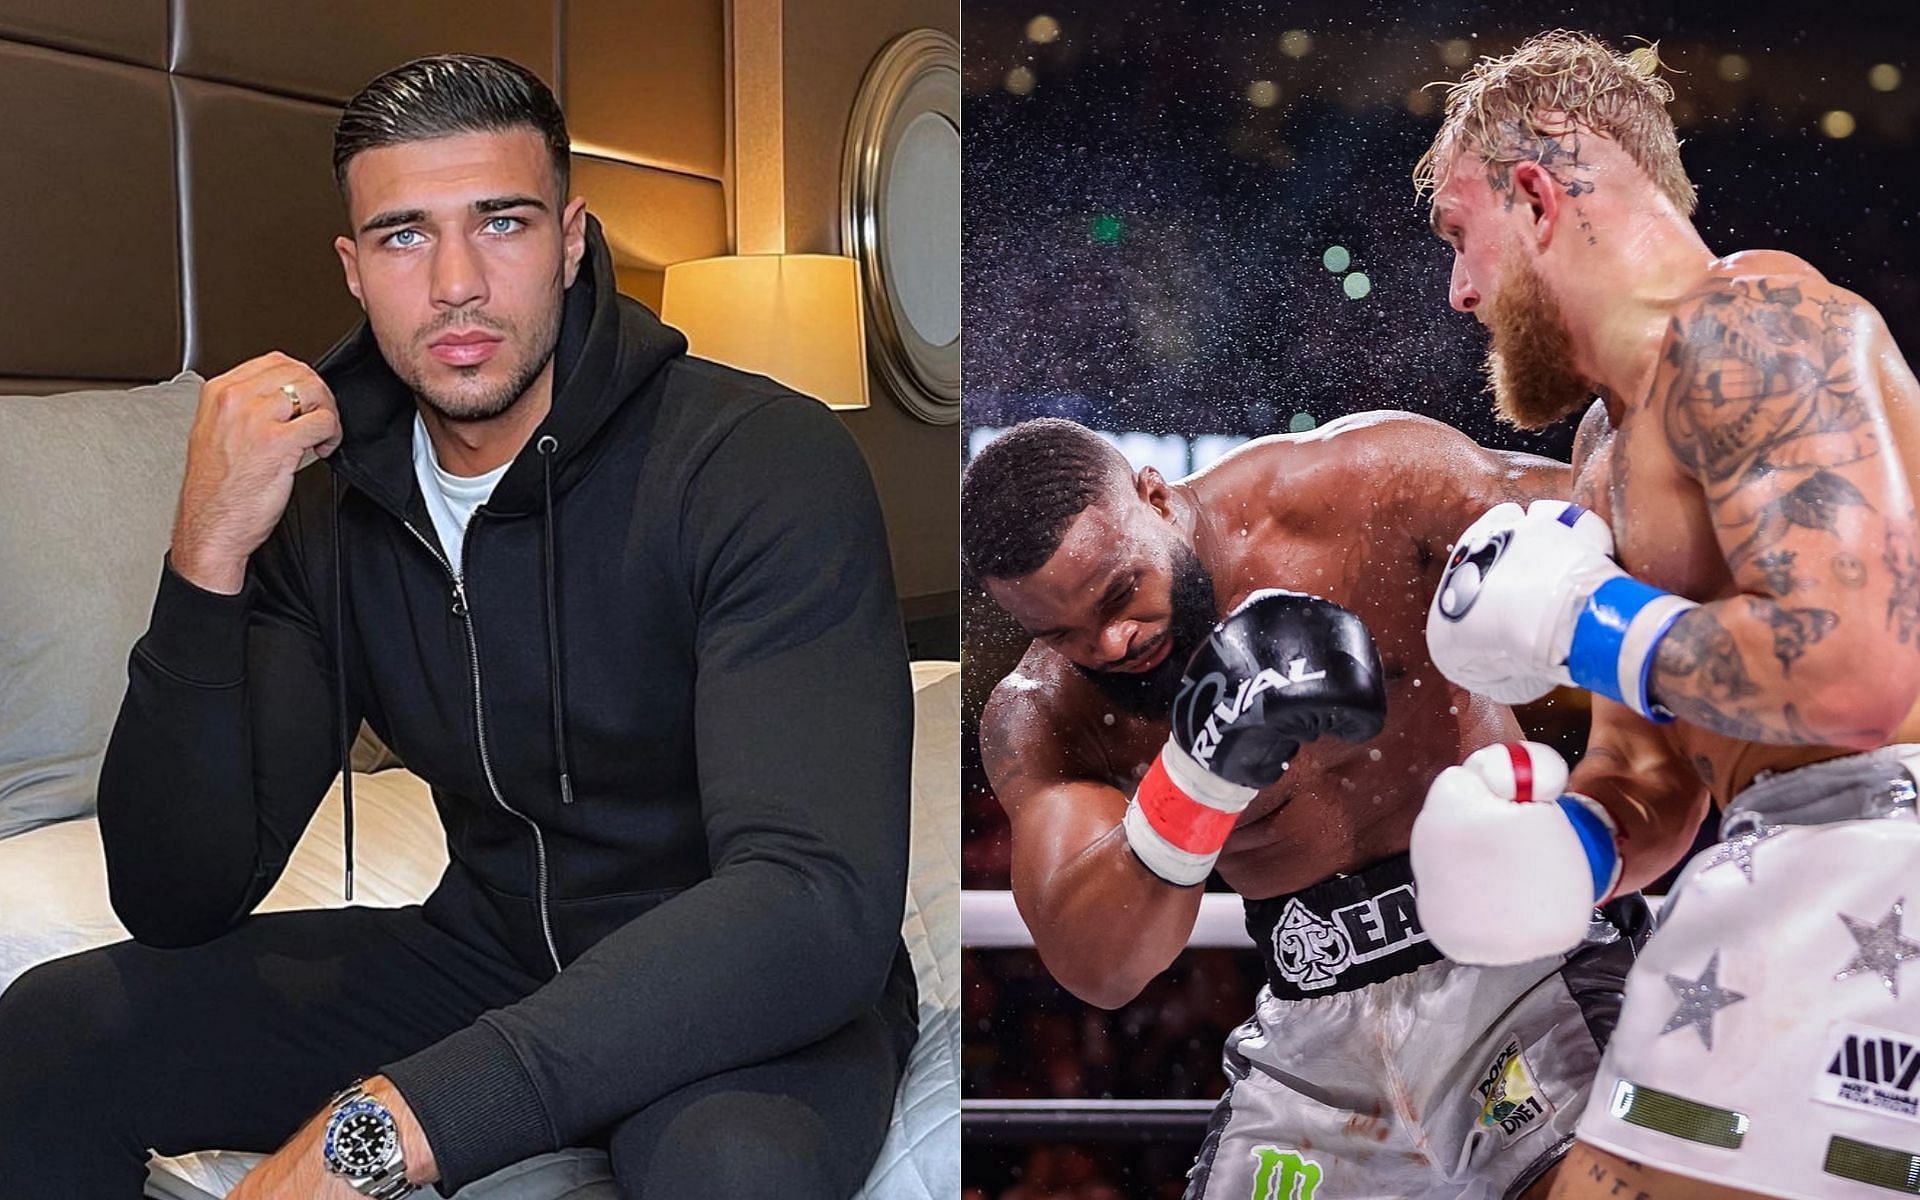 Tommy Fury (left) and Jake Paul vs Tyron Woodley (right) [Image credits: @tommyfury on Instagram and @ShowtimeBoxing on Twitter]